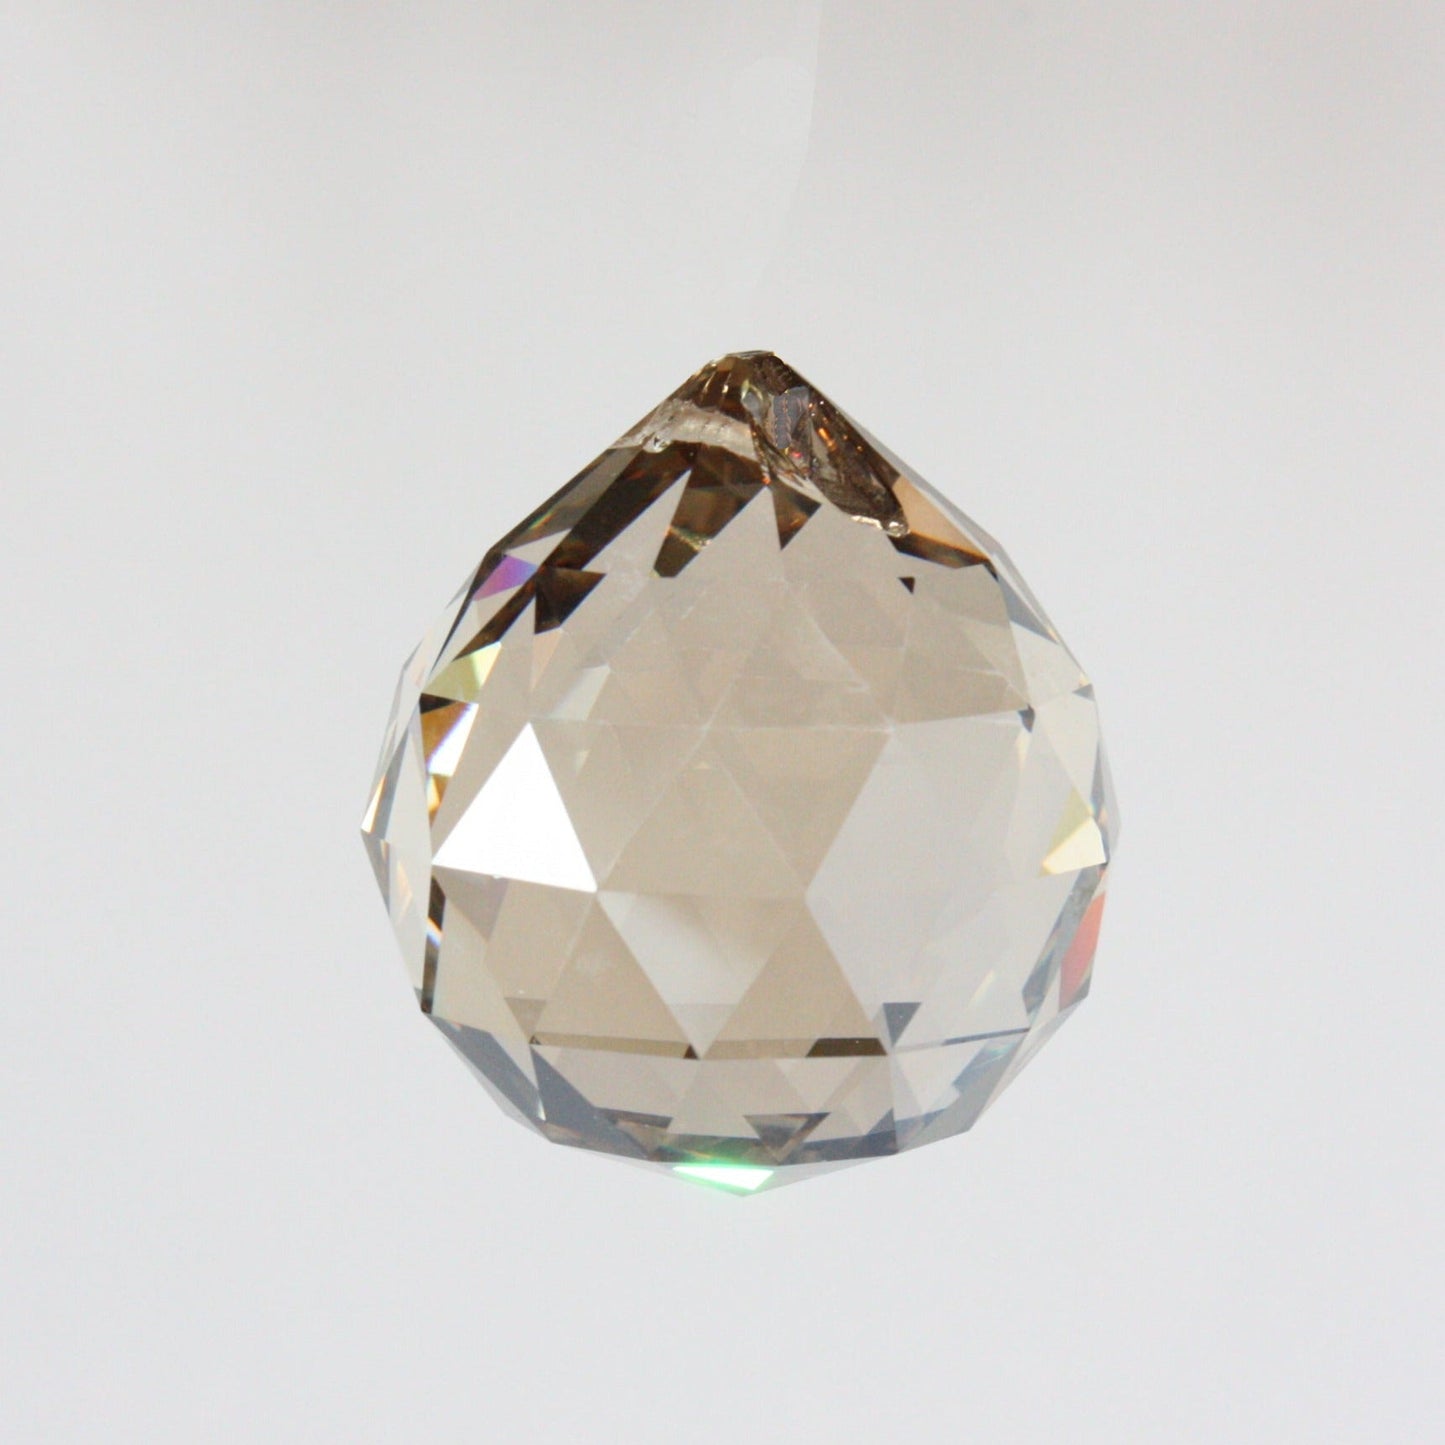 60mm Colored Faceted Ball